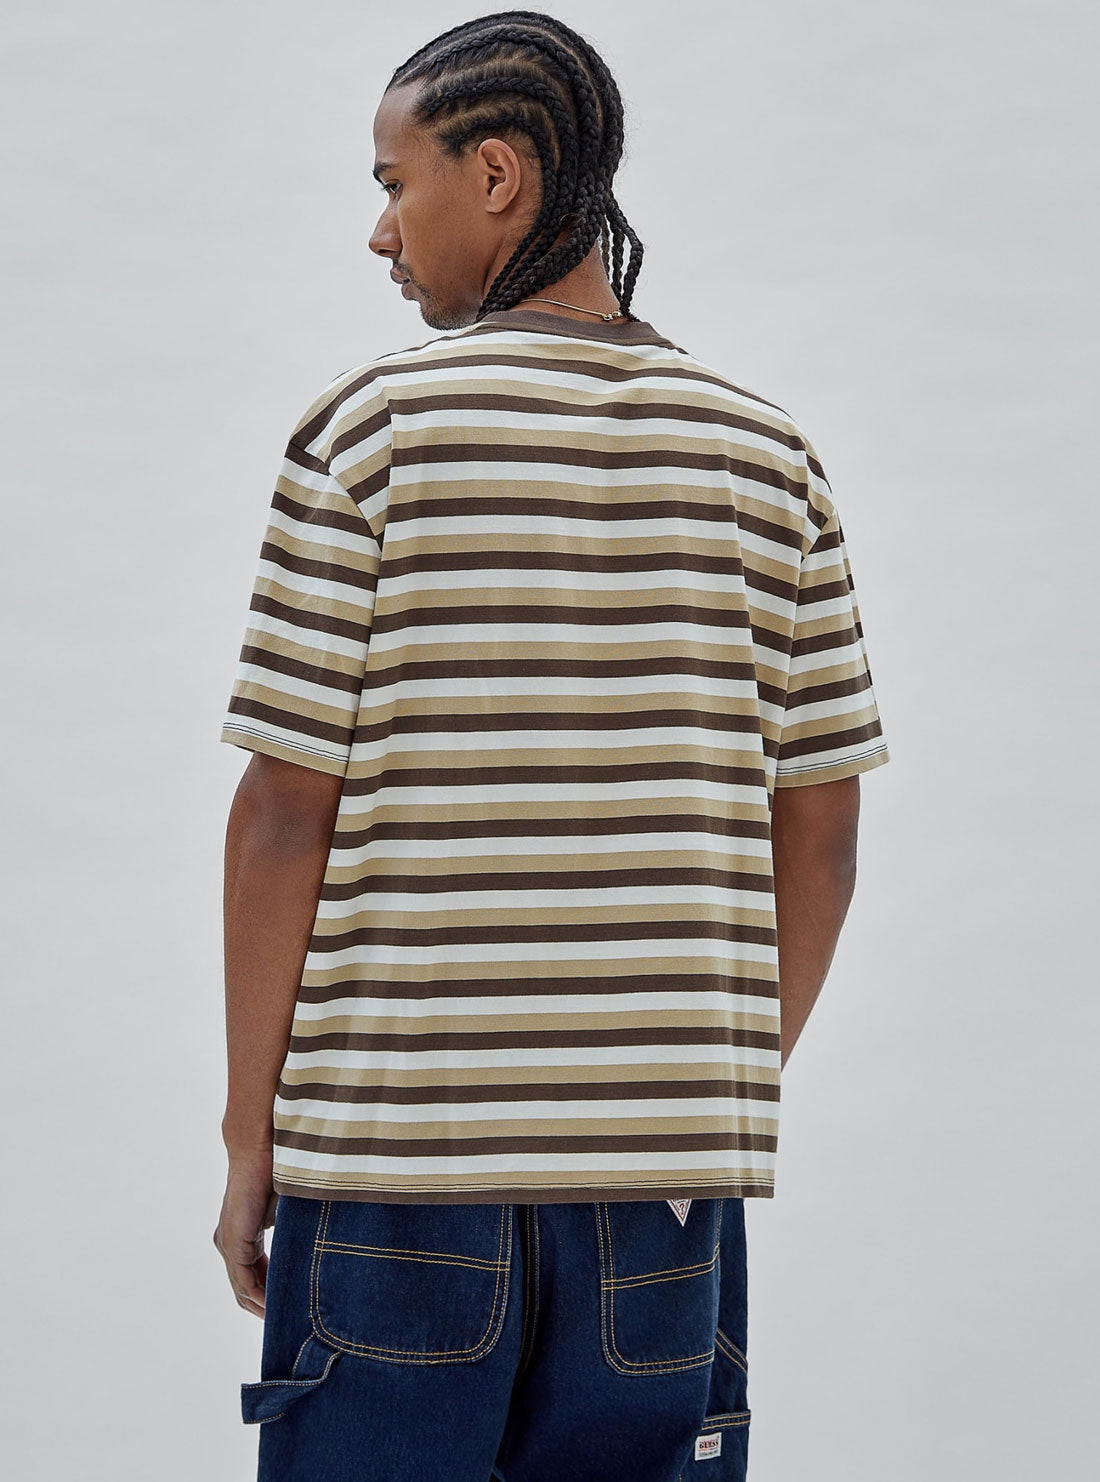 Guess Originals Eco Brown and White Striped T-Shirt | GUESS men's apparel | back view